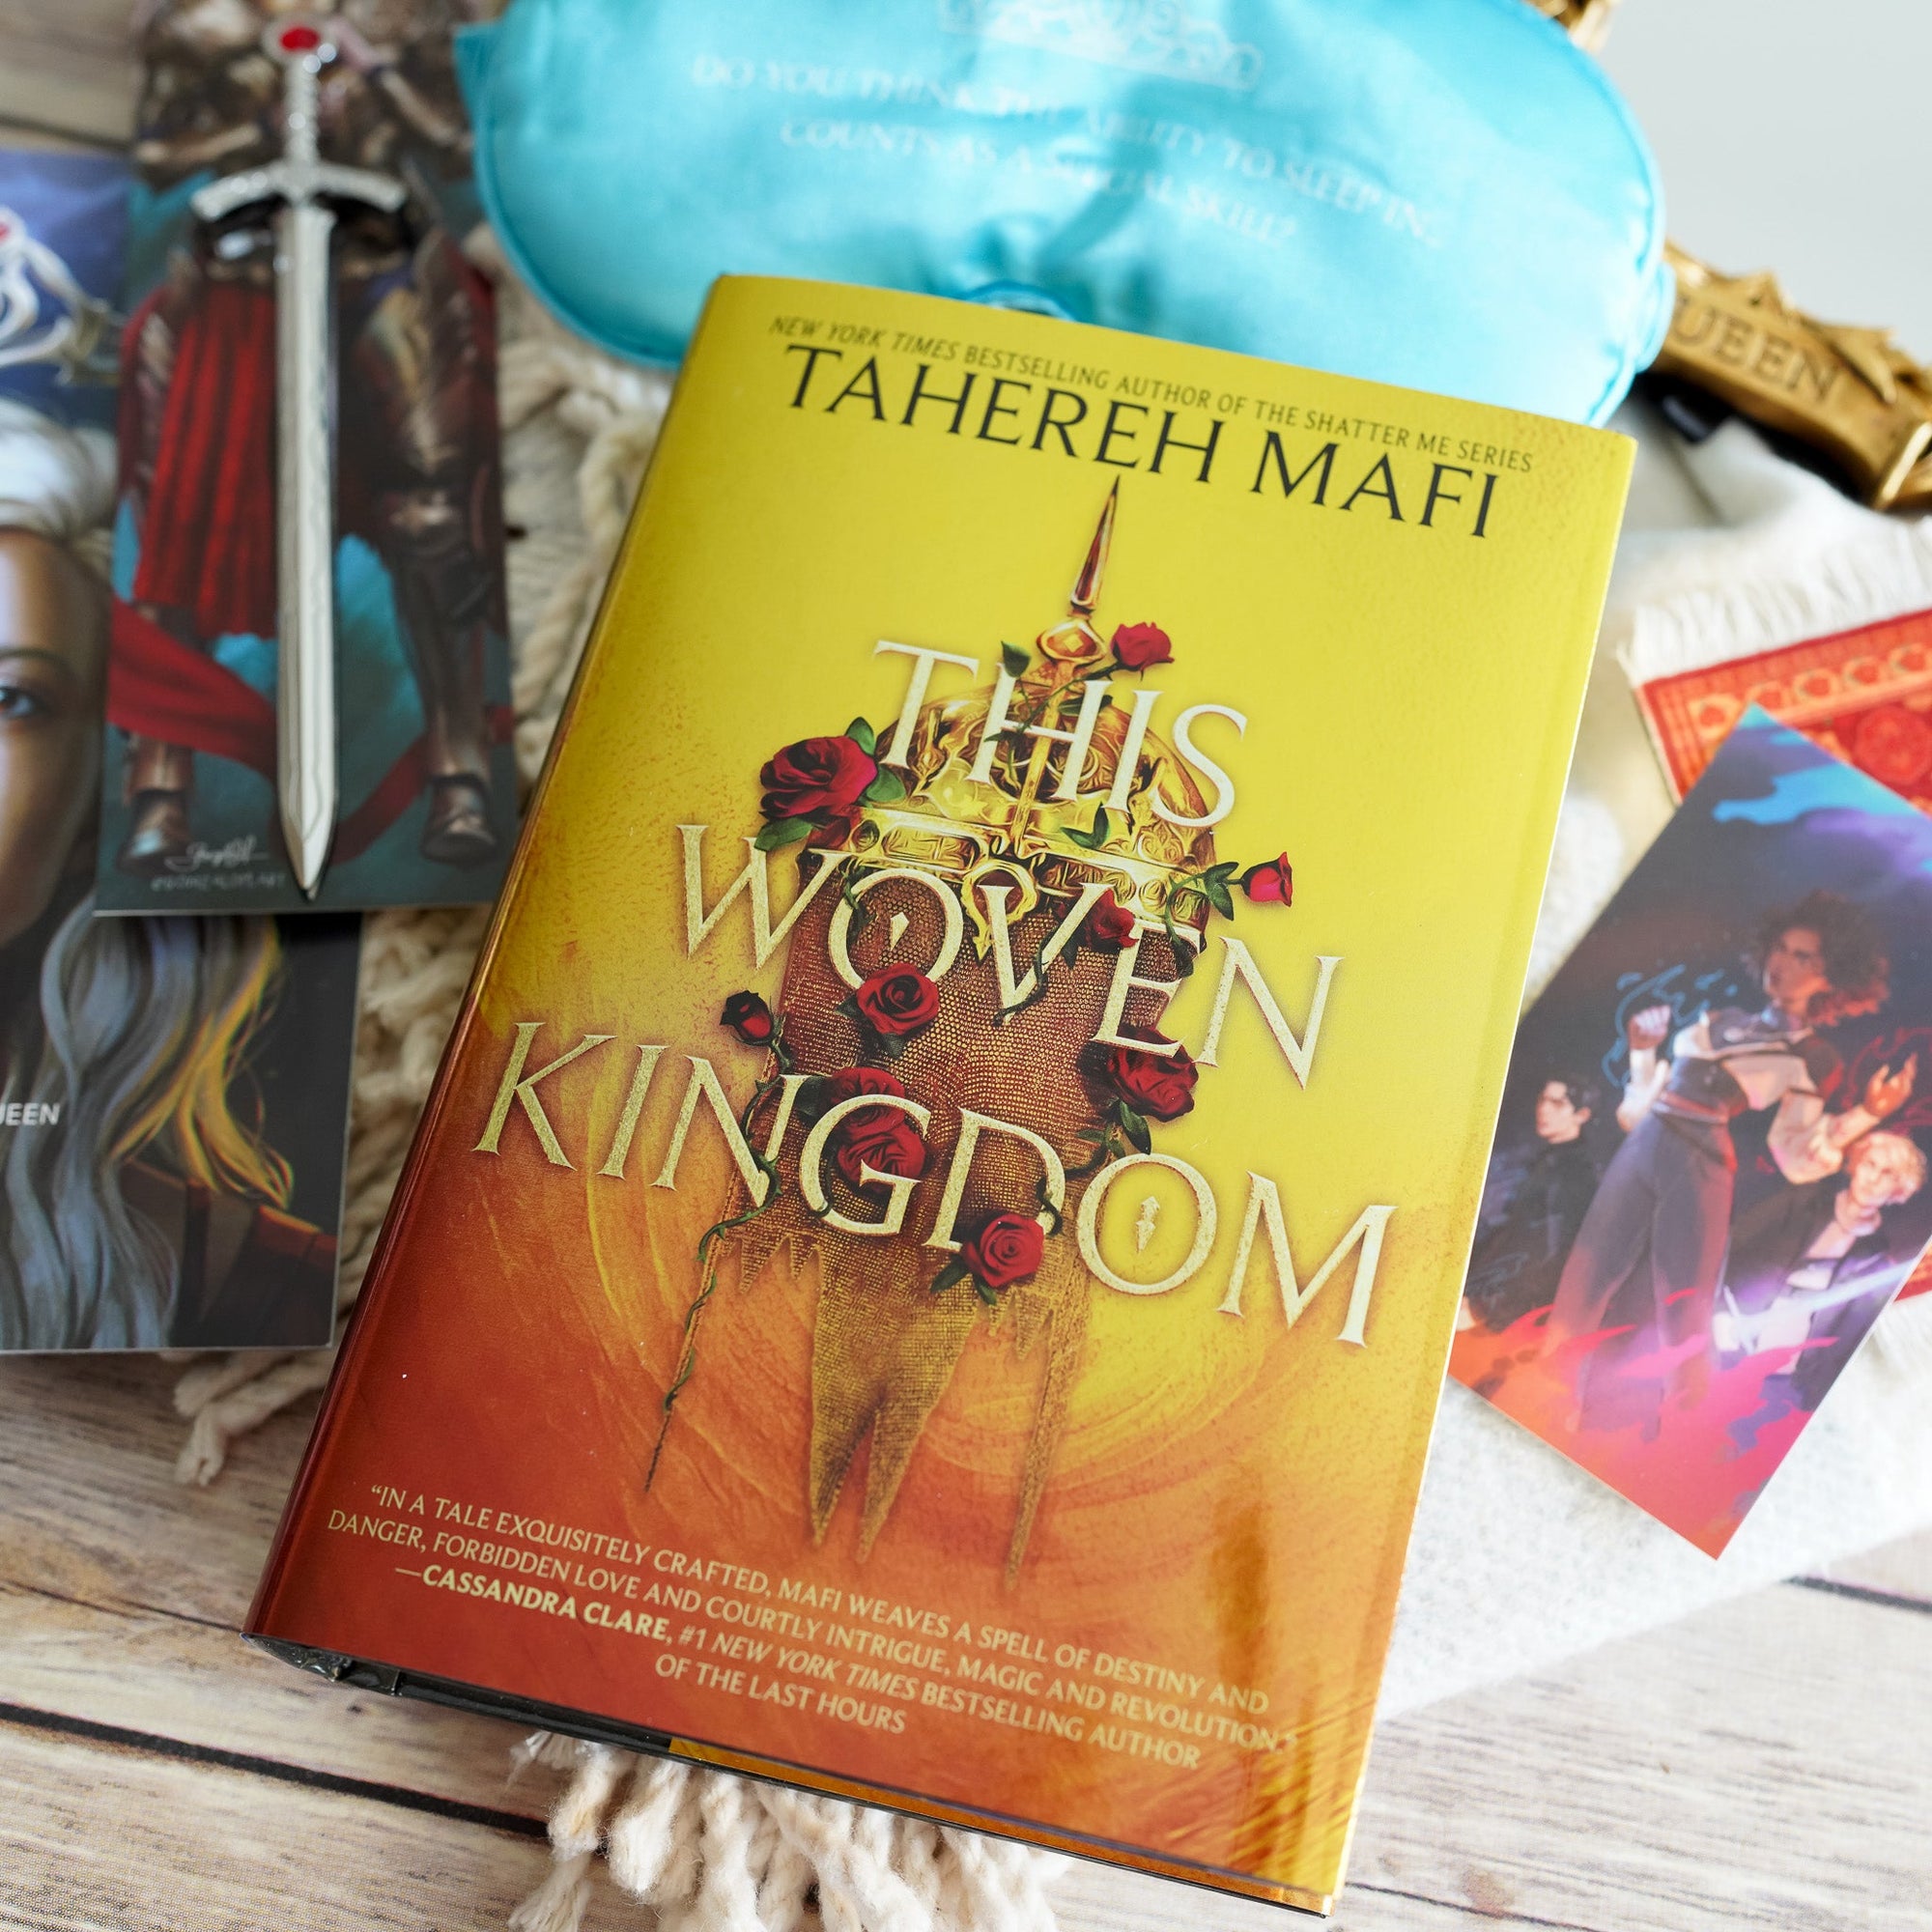 This Woven Kingdom from LitJoy Crate | Collectibles & Gifts for Booklovers